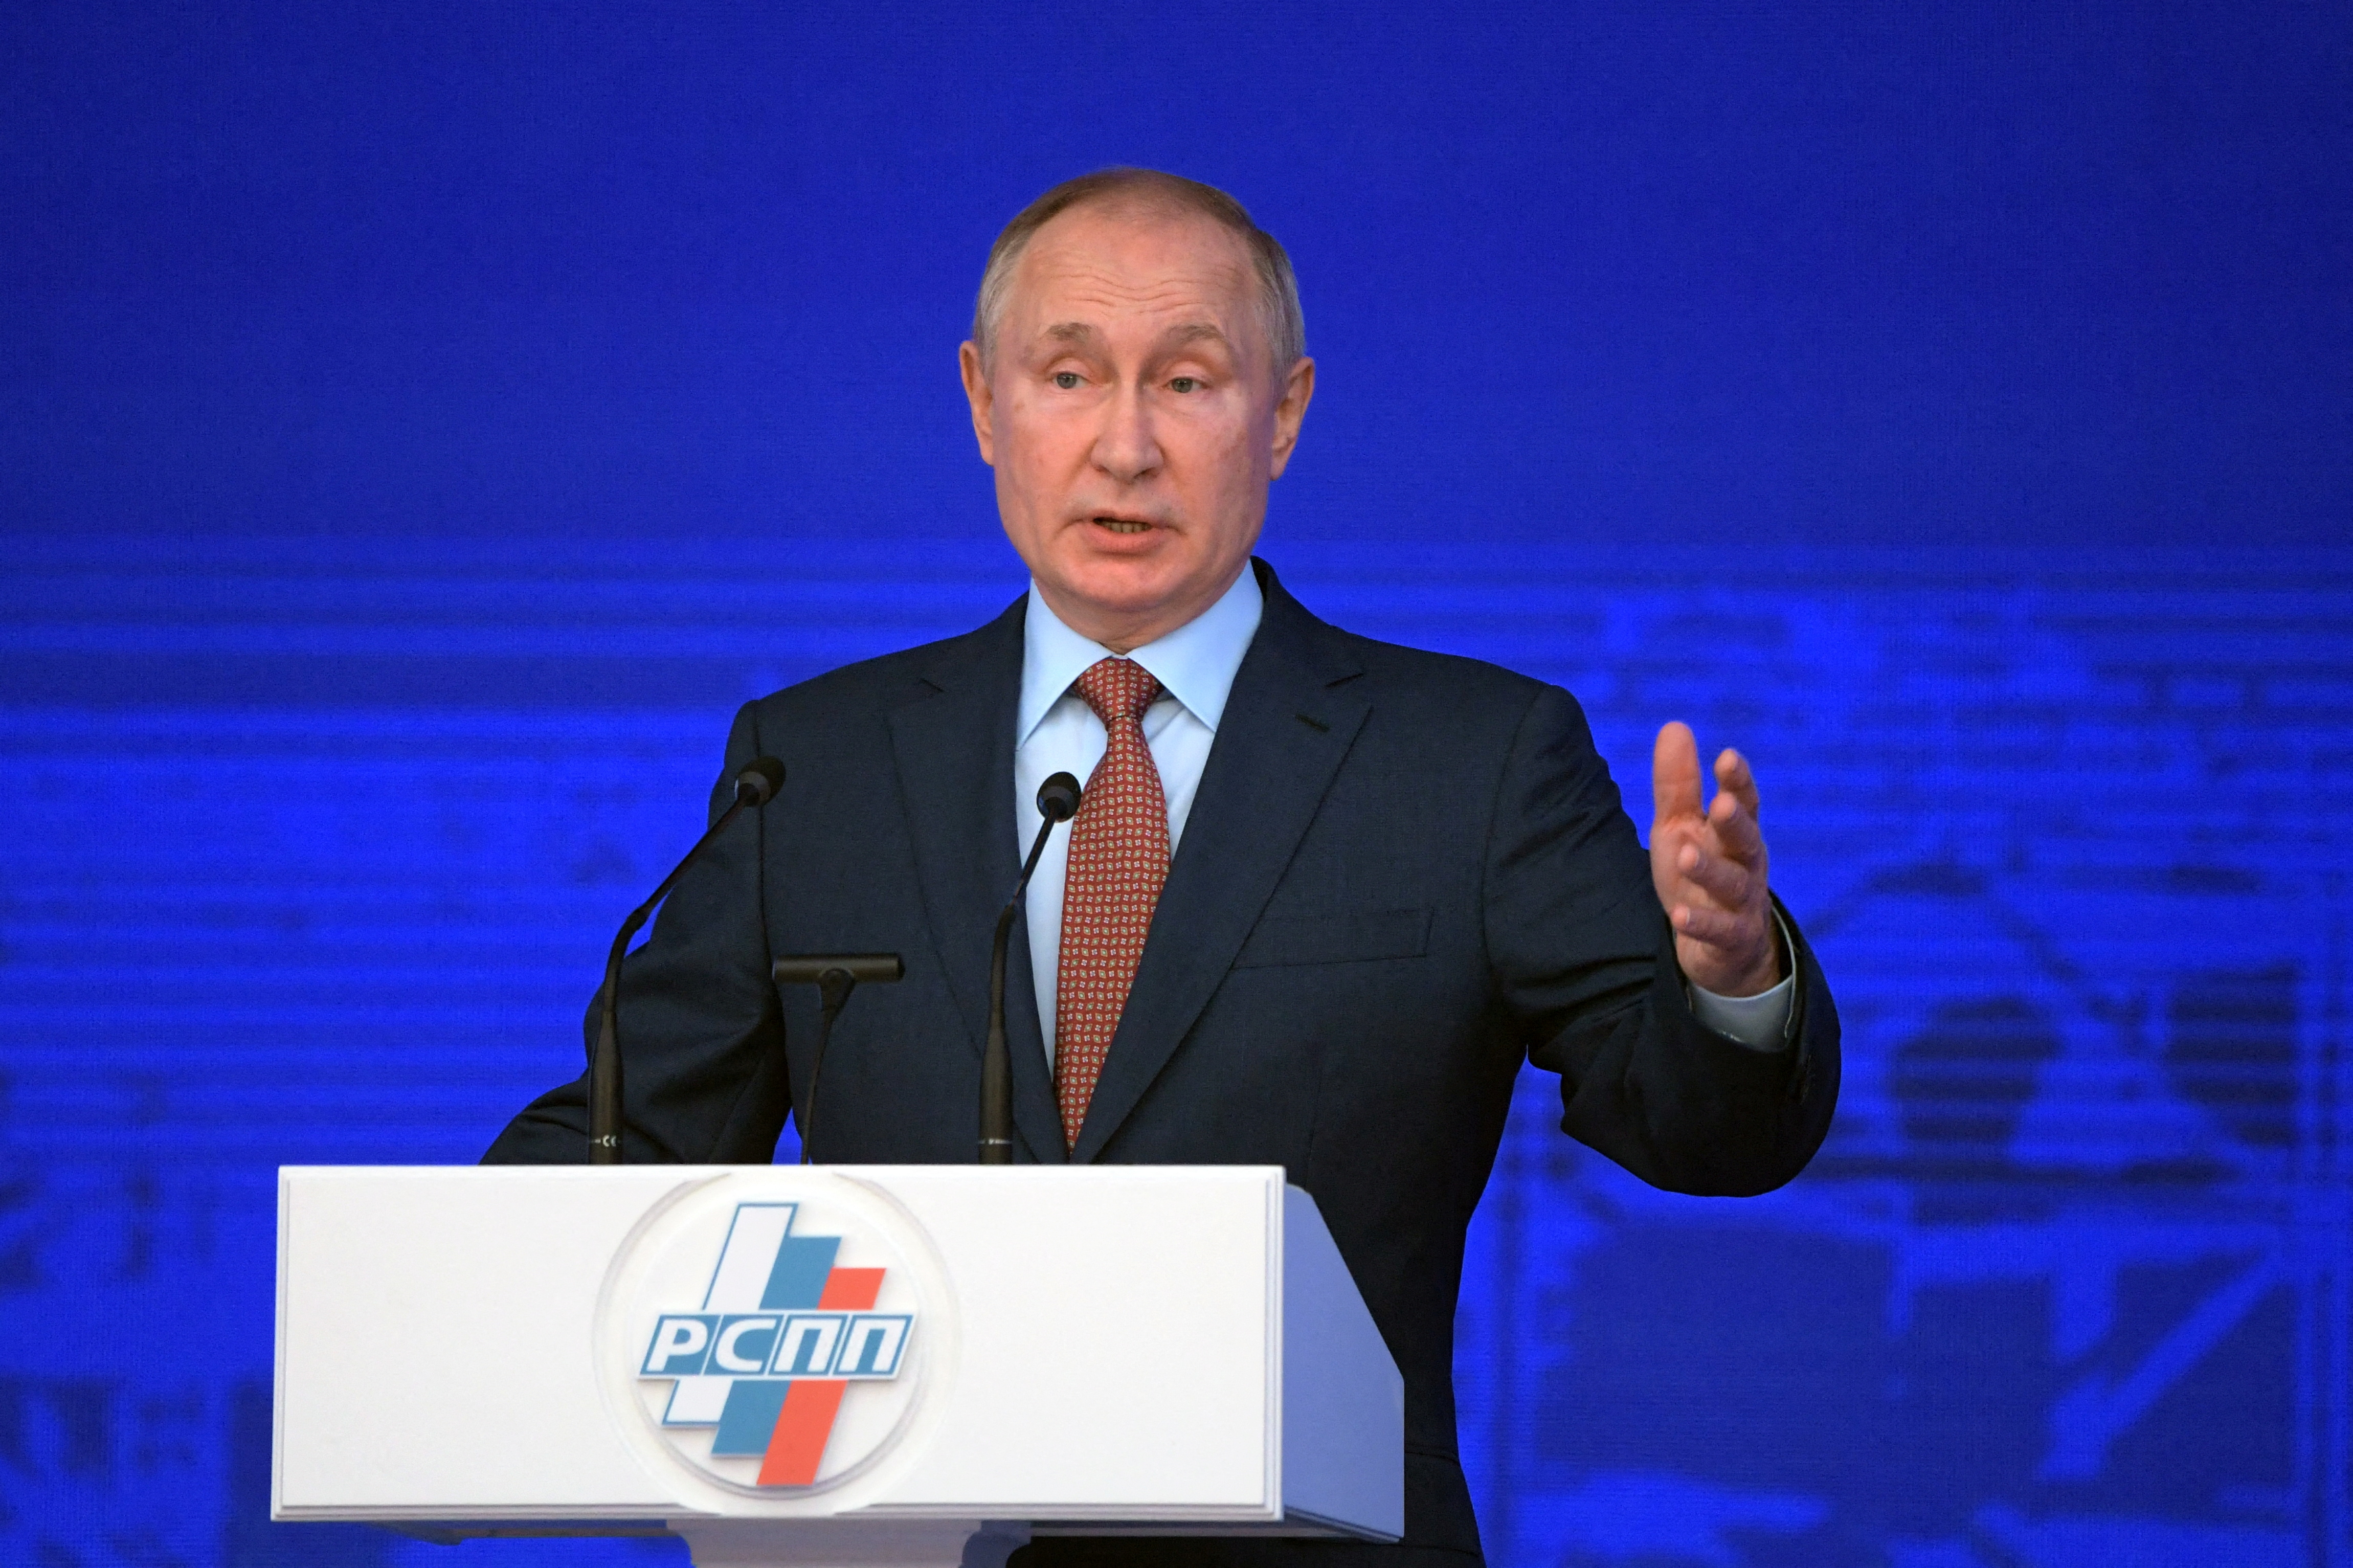 Russian President Vladimir Putin attends a convention of the Russian Union of Industrialists and Entrepreneurs (RSPP) in Moscow